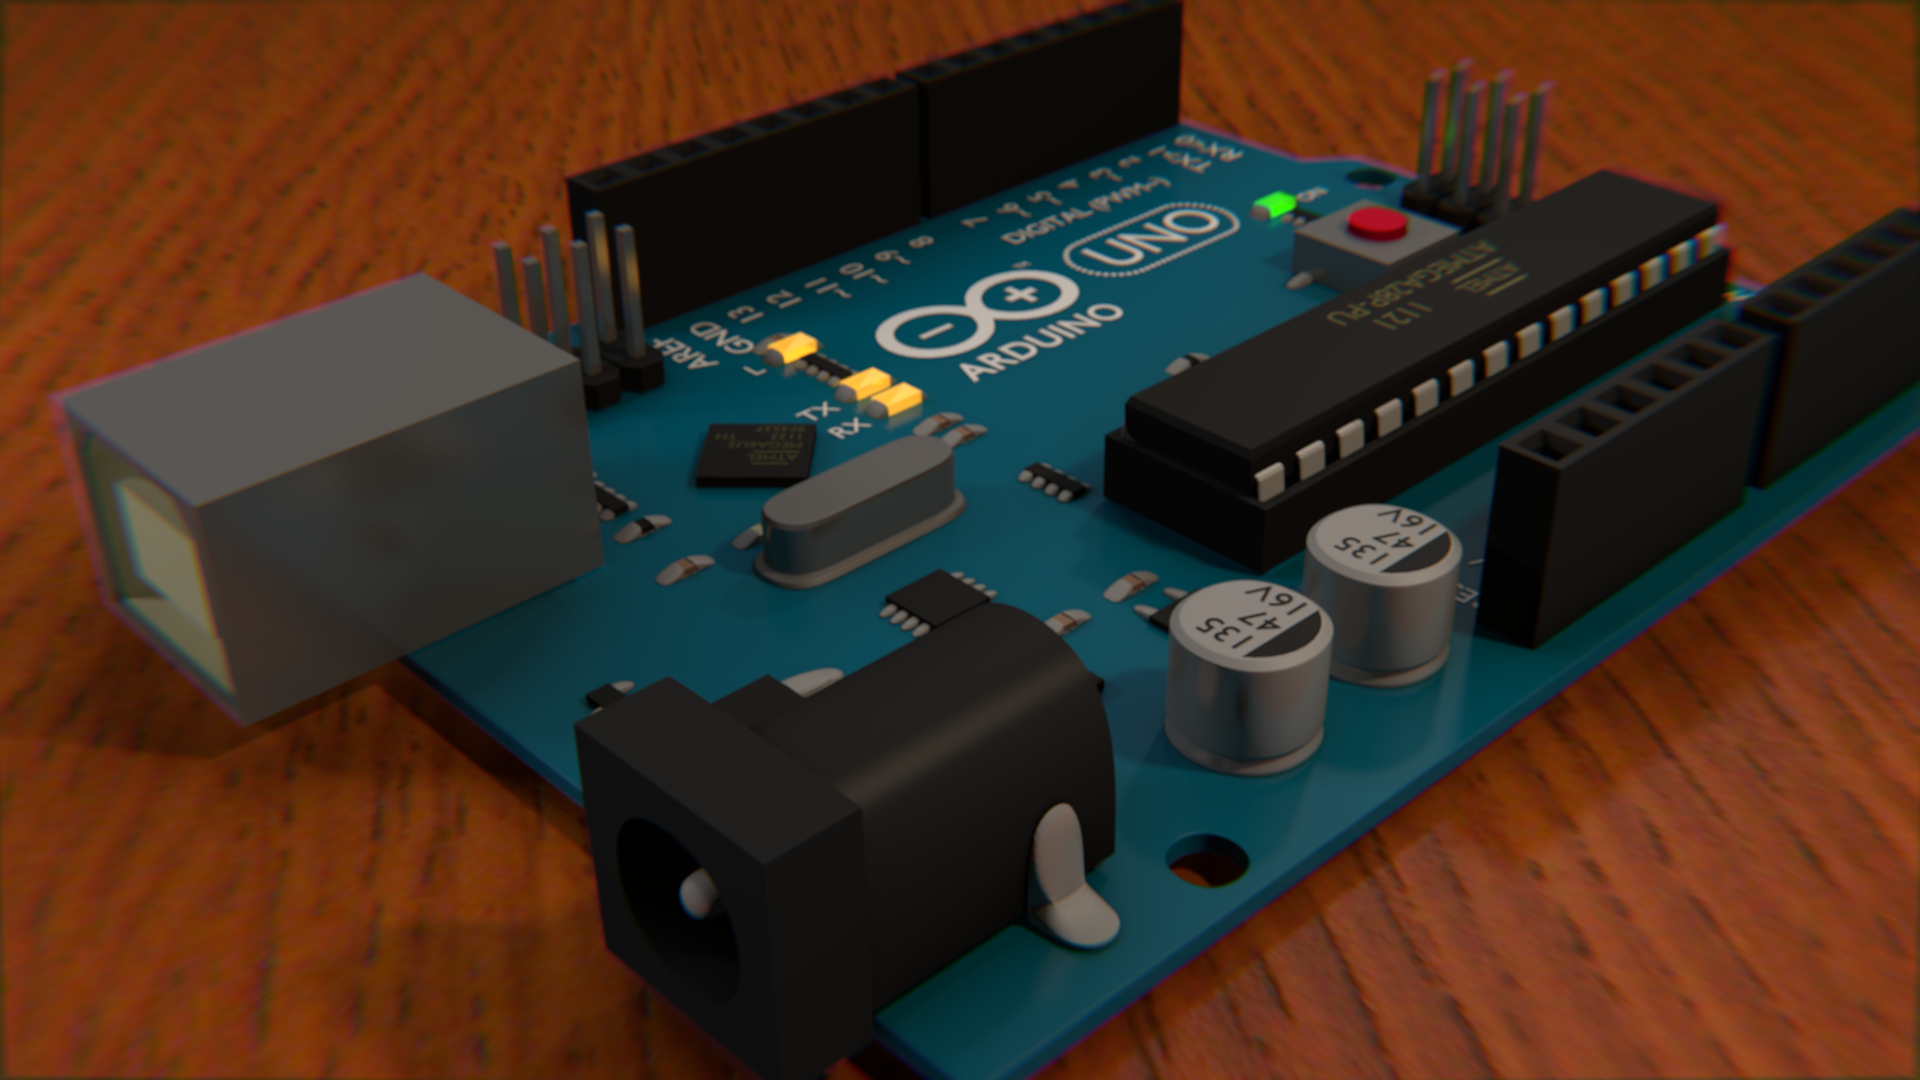 The finished Arduino Uno in Blender